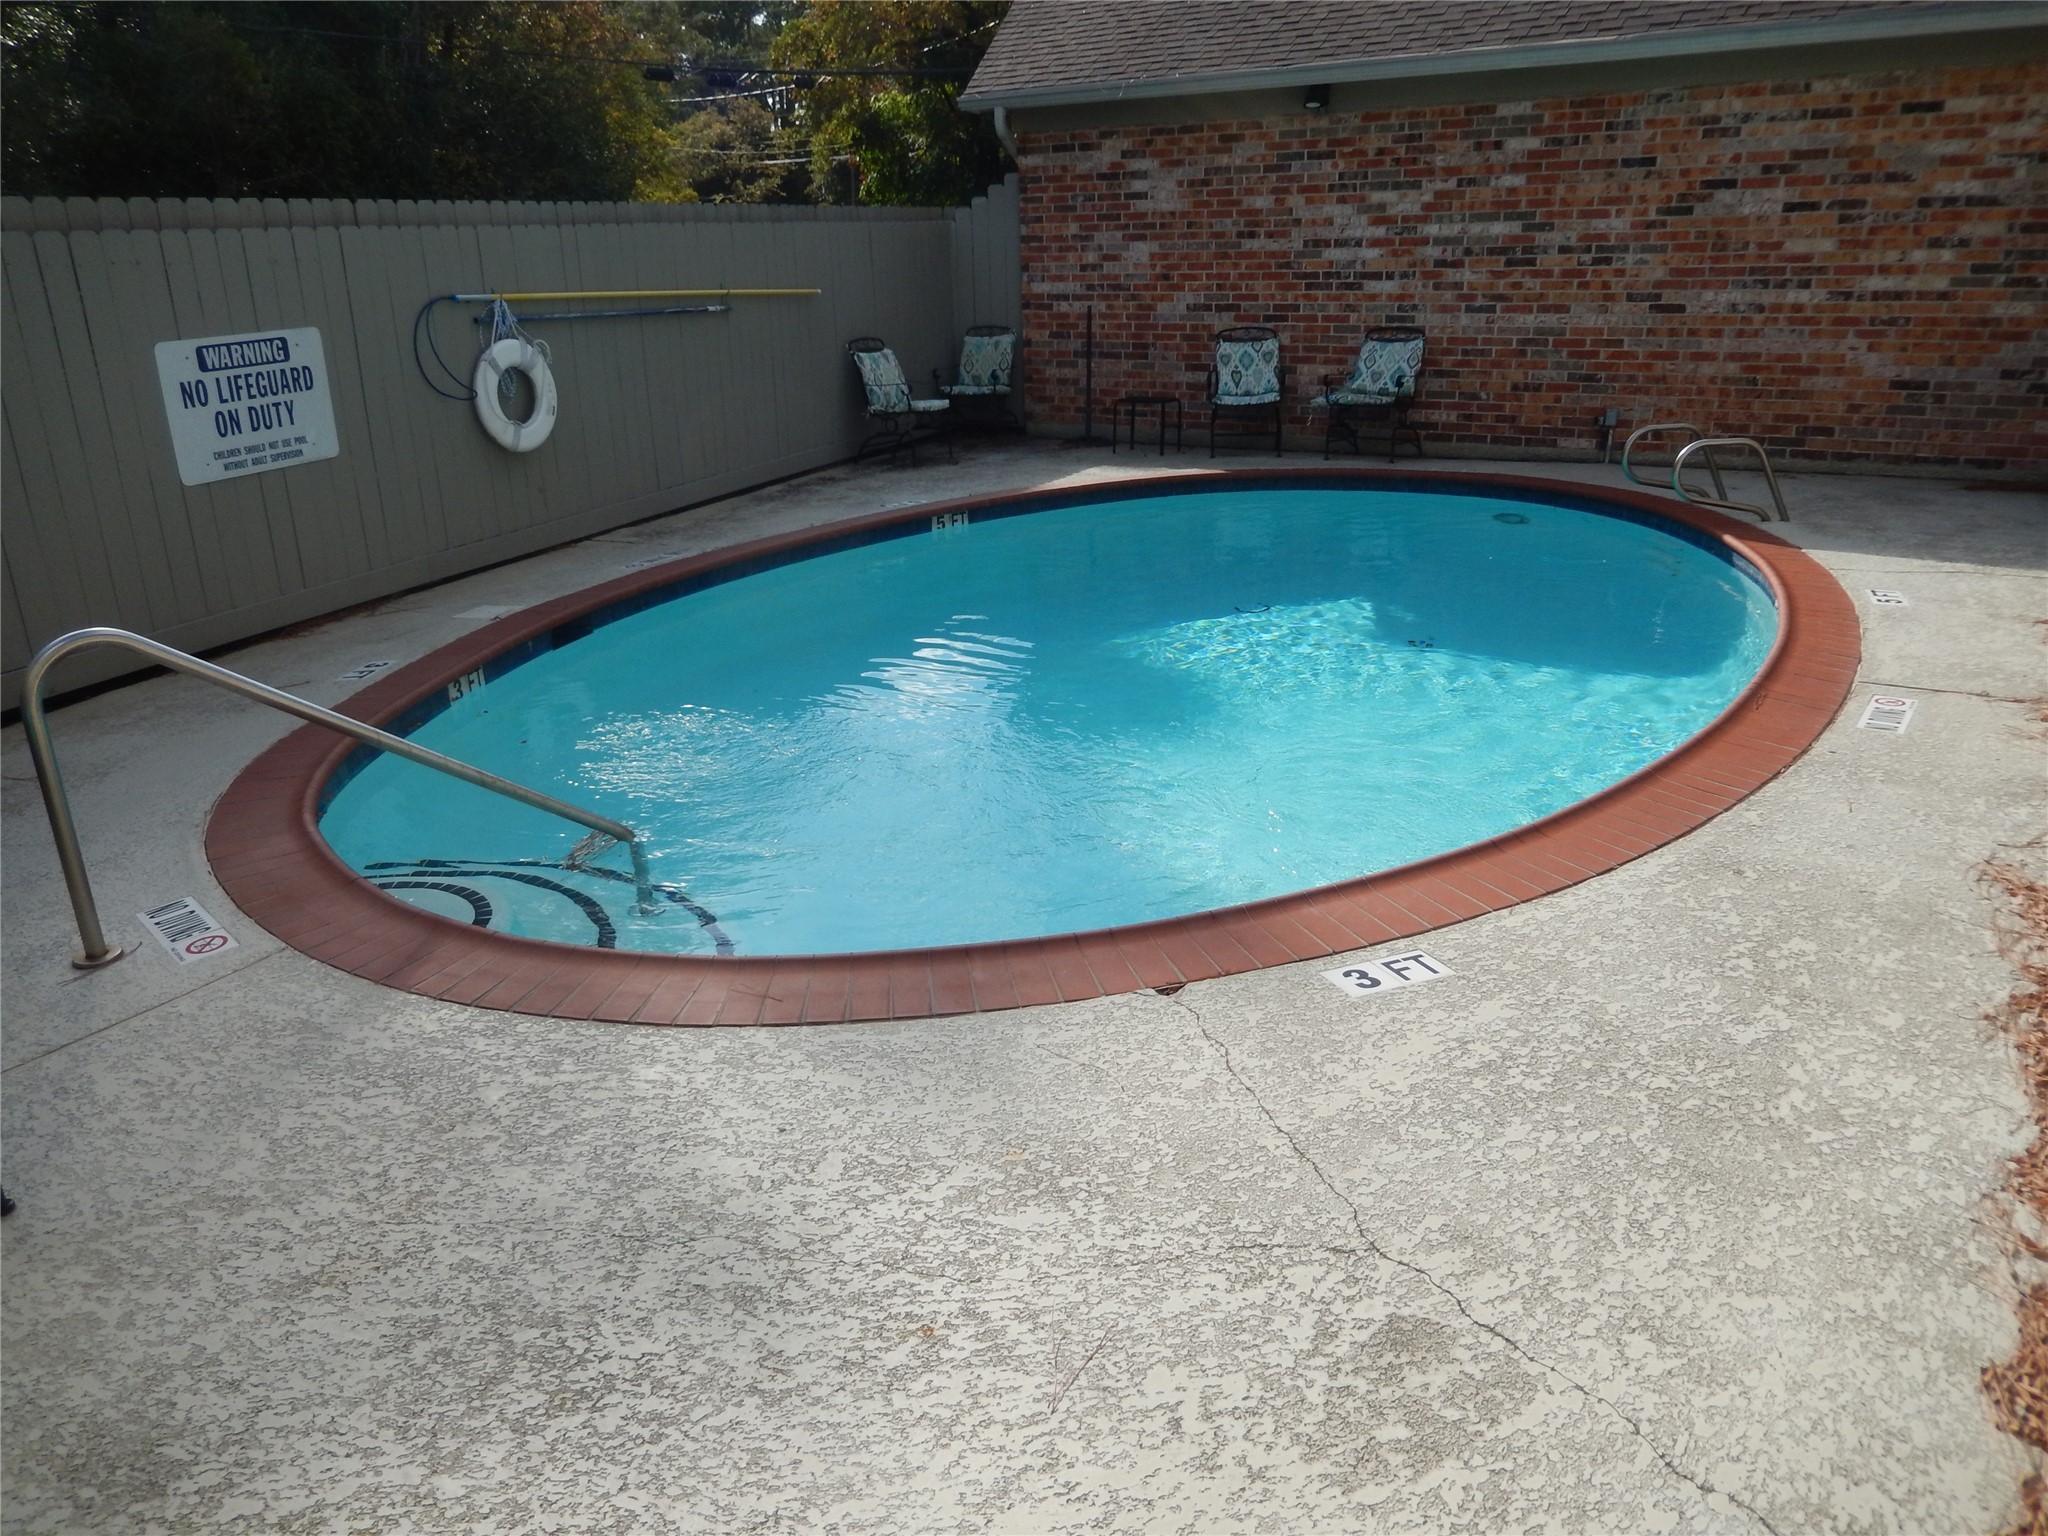 Area pool for complex